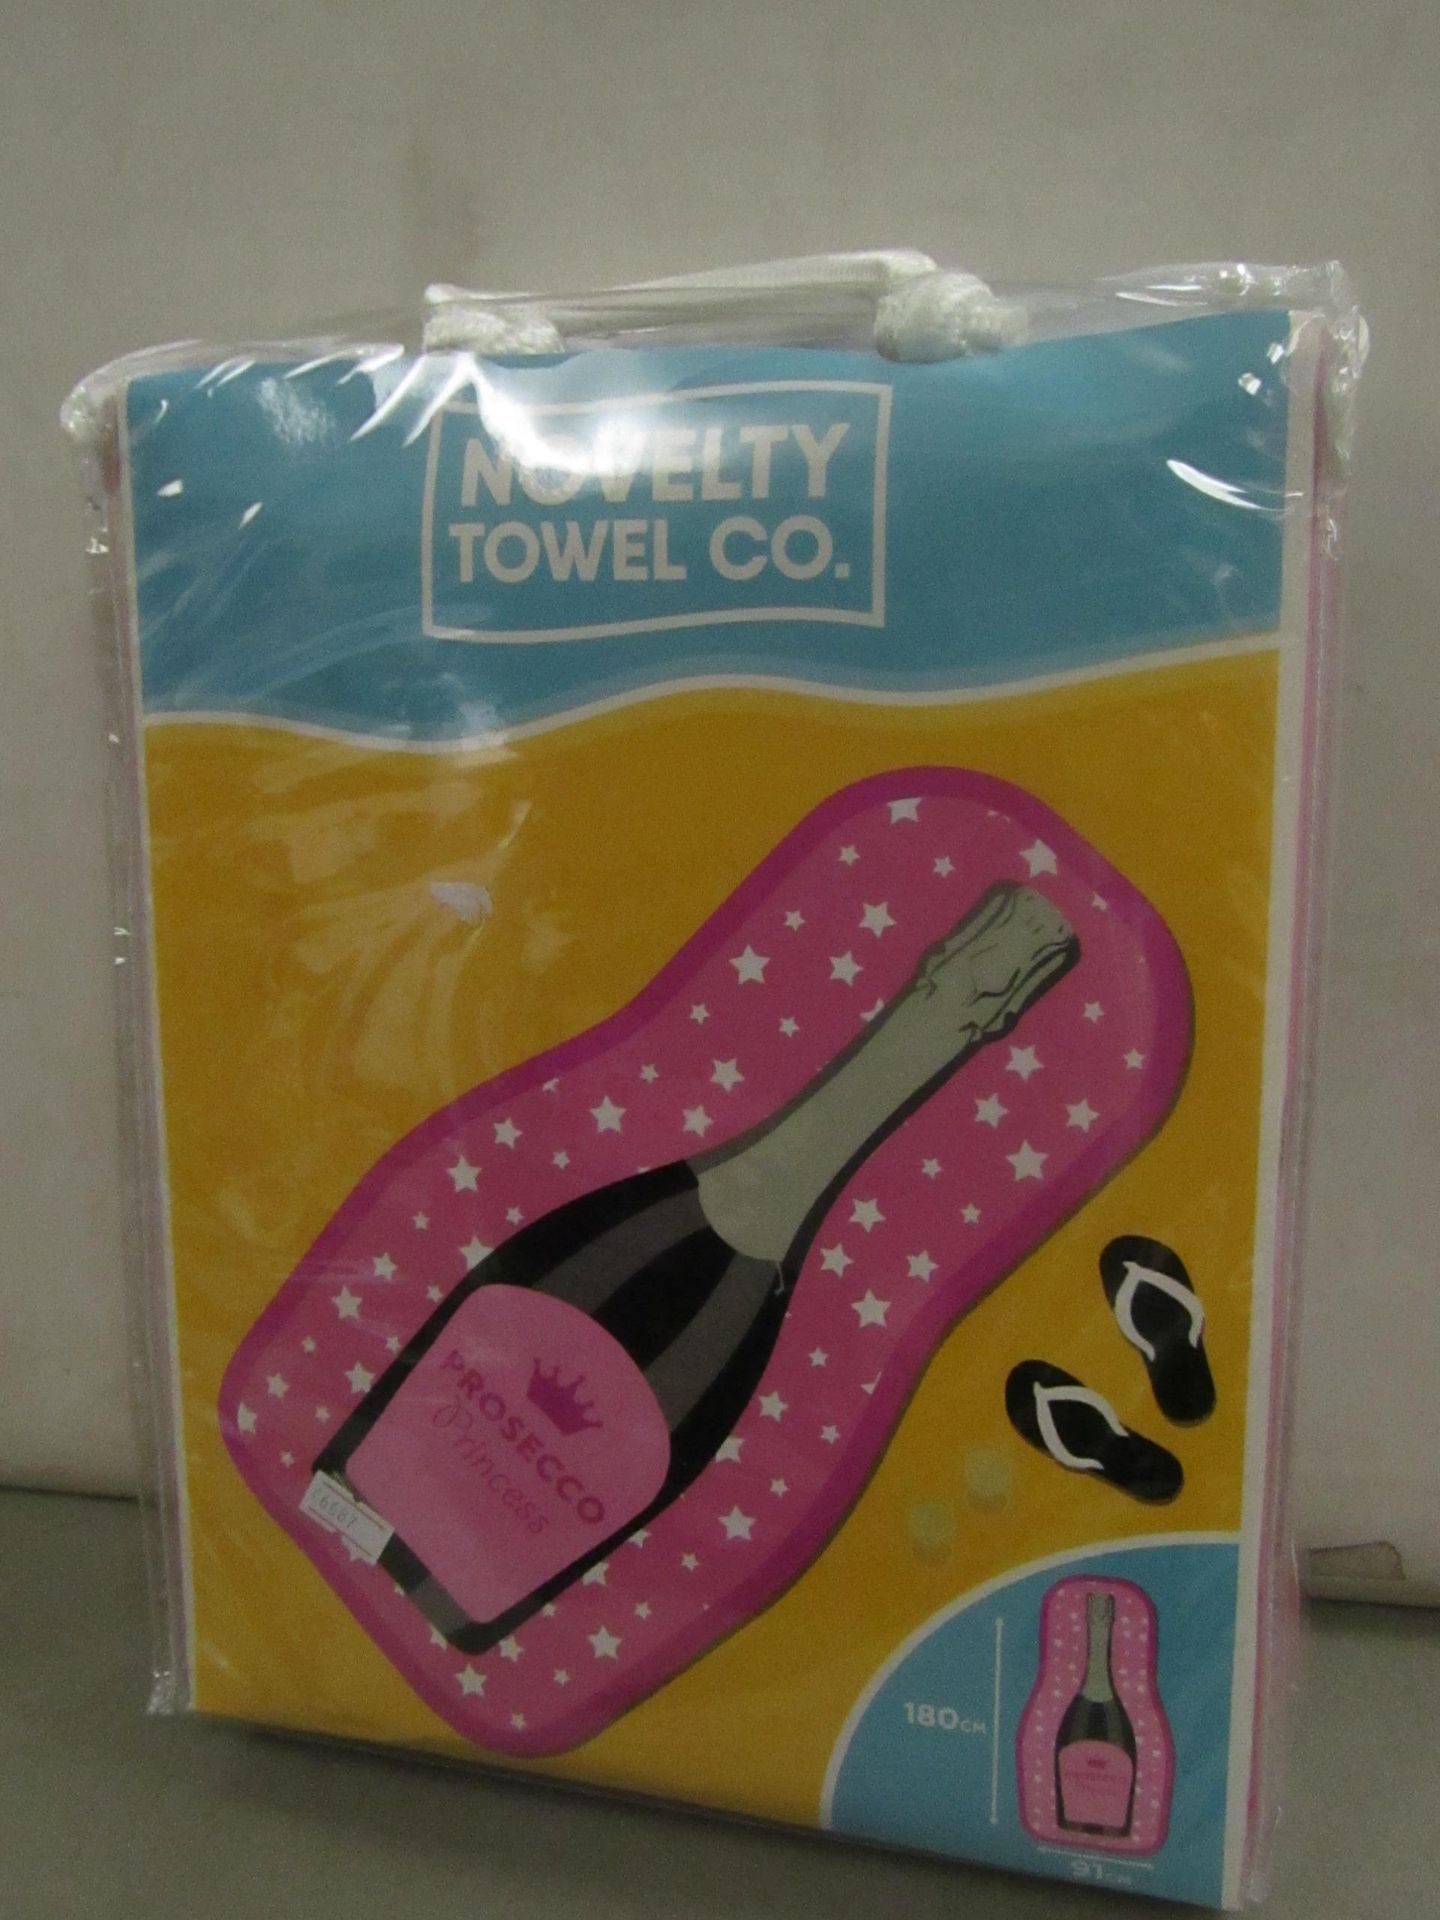 Novelty Towel Co. Prosecco Princes Towel 91cm by 180cm new and packaged